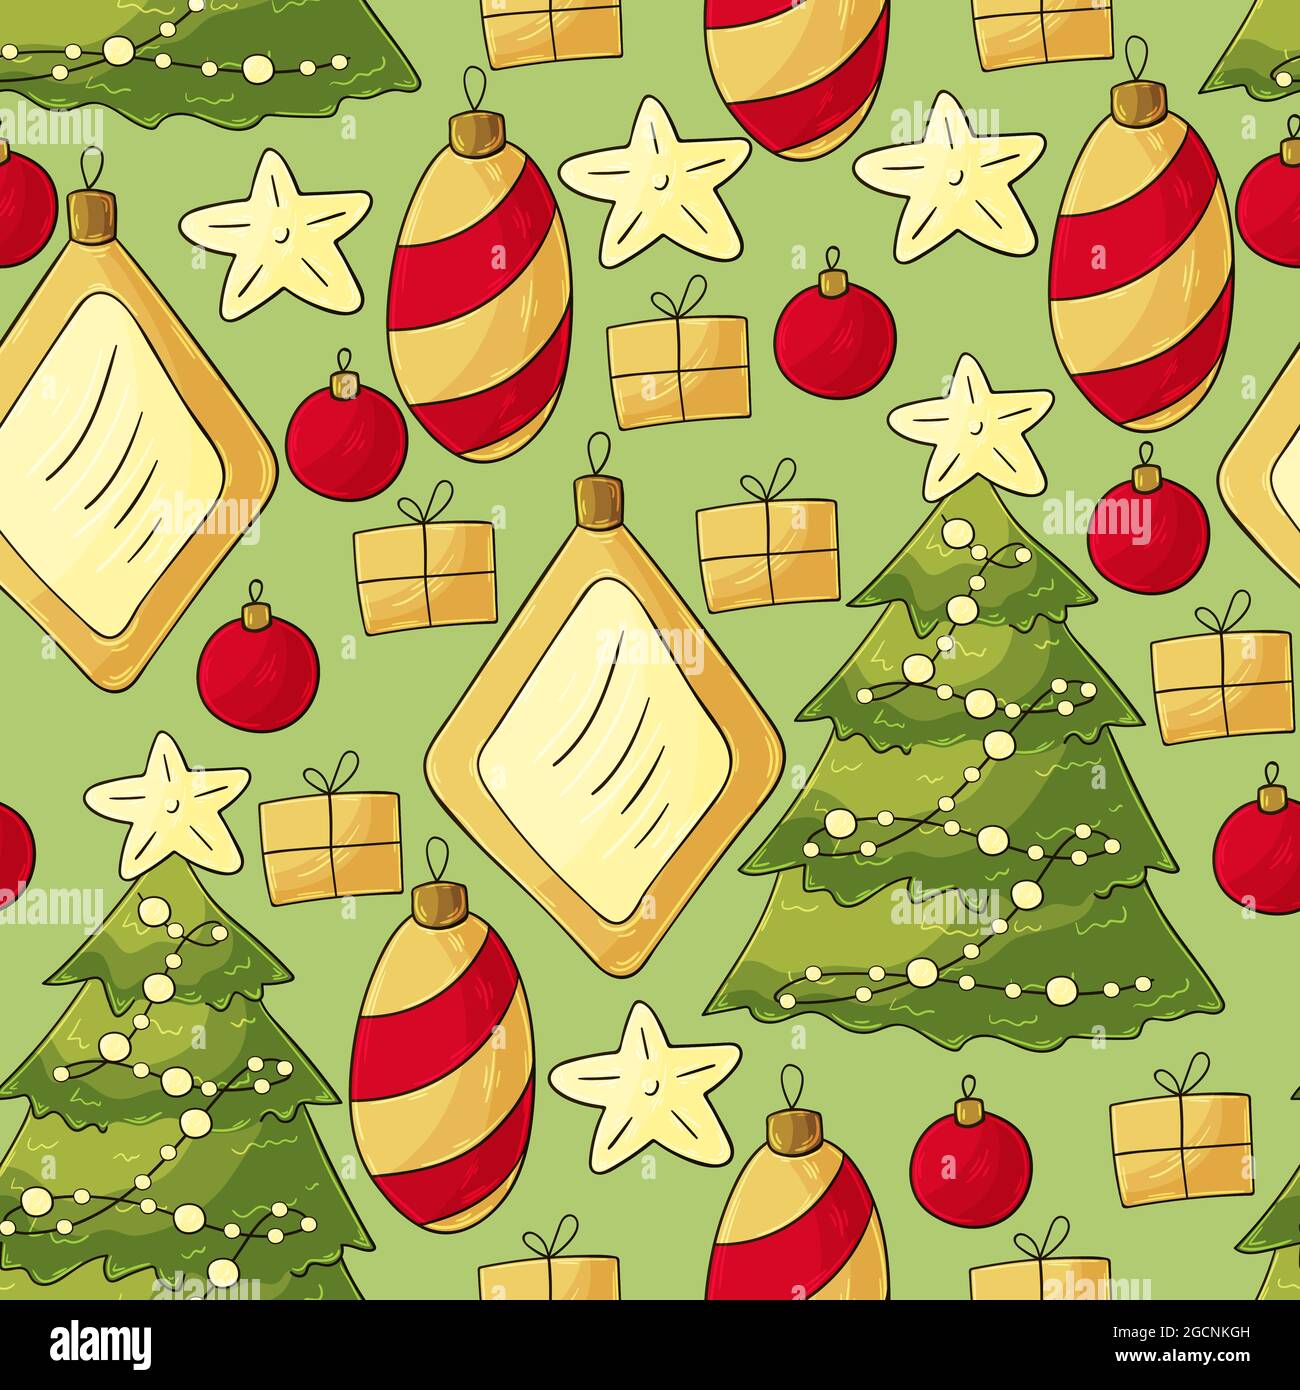 Seamless vector pattern with stars, Christmas tree decorations ...